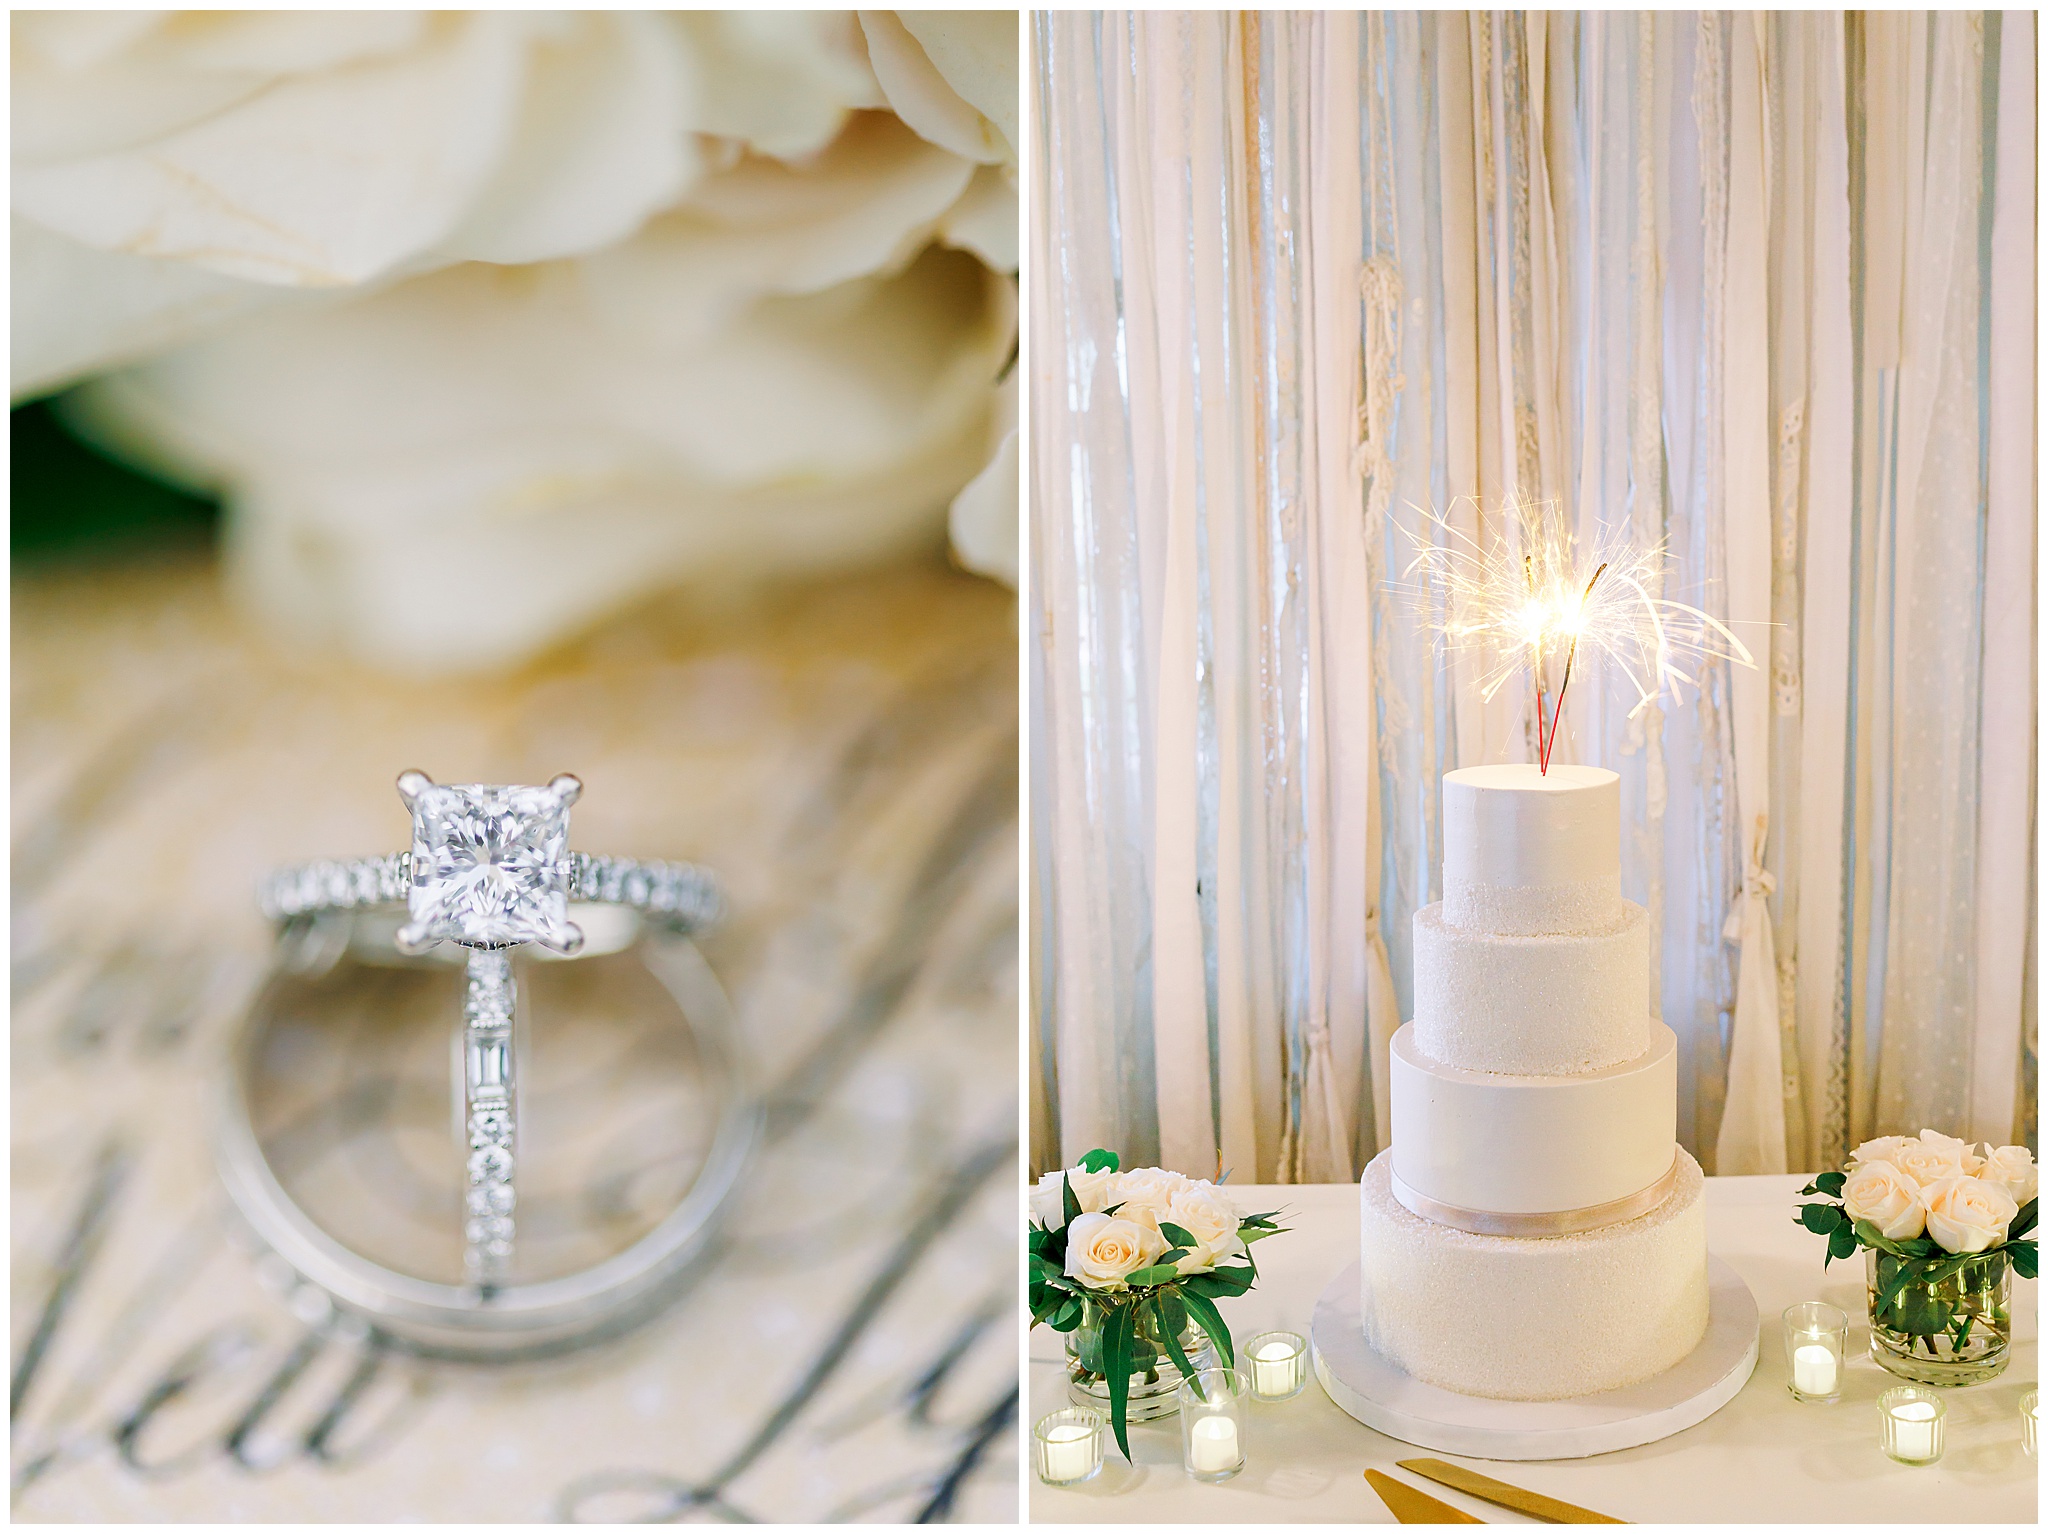 Wedding Rings stacked, Wedding Cake with sparkler as cake topper